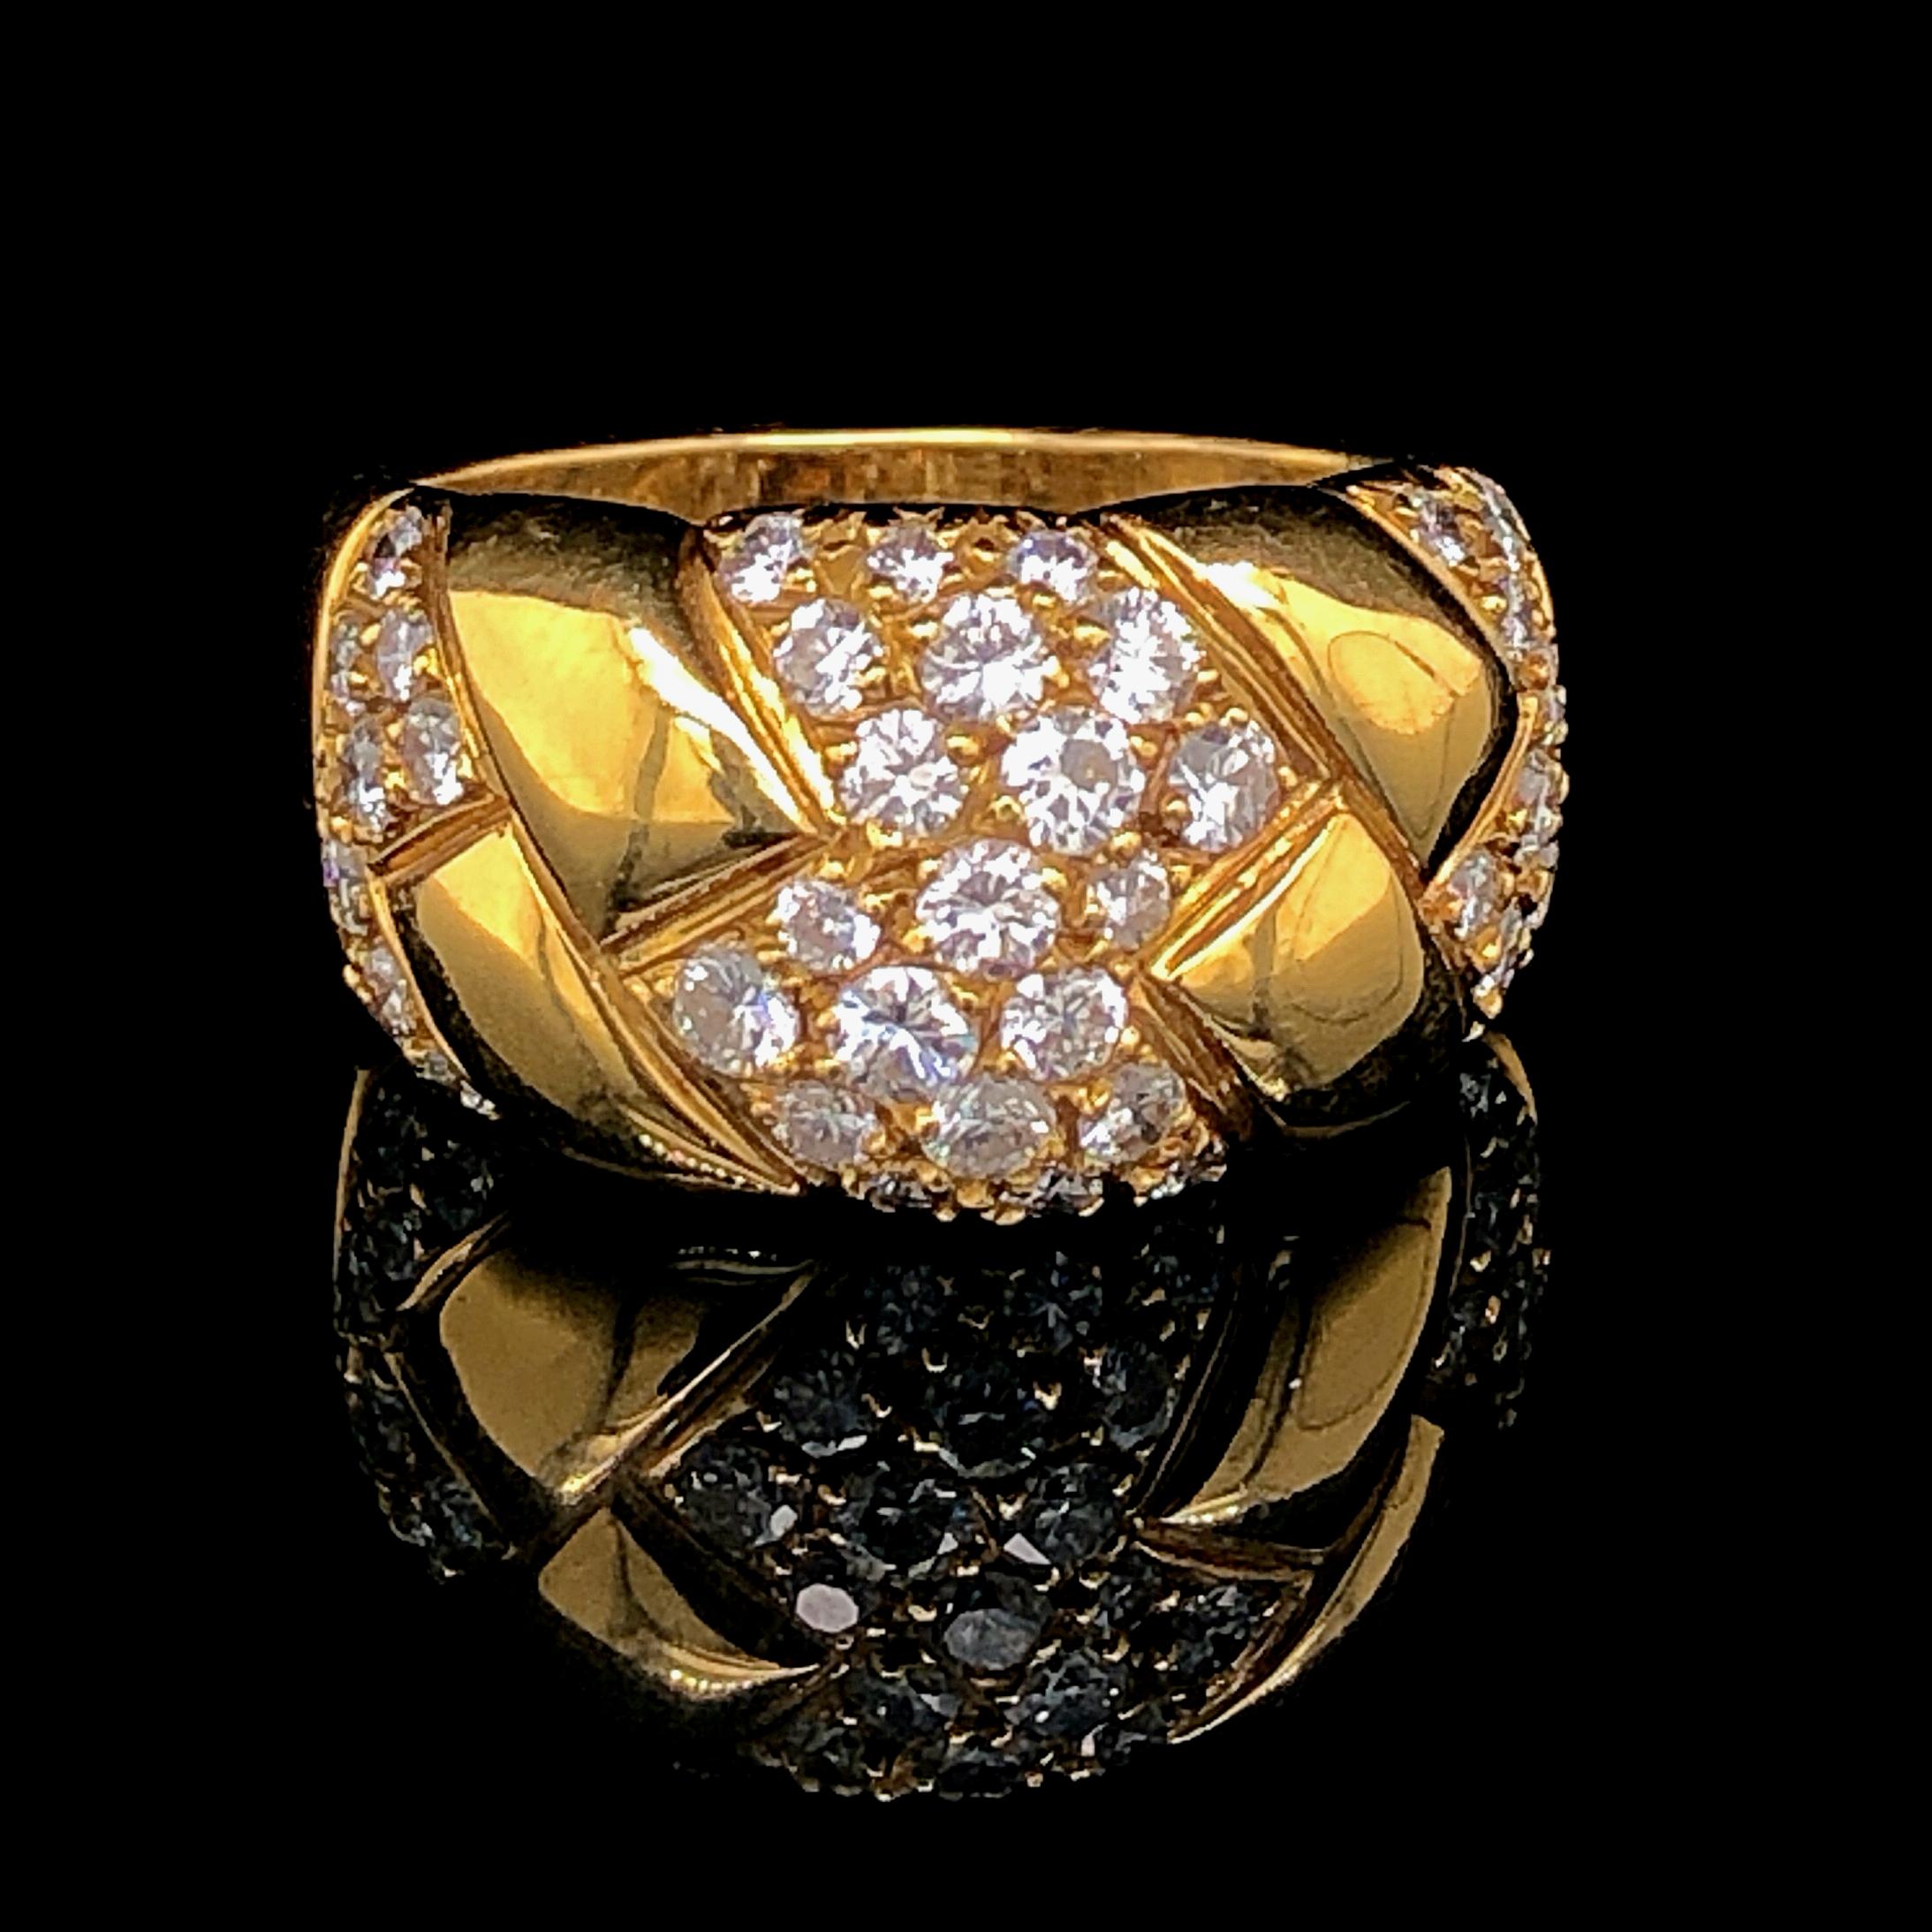 A diamond ring in 18k yellow gold, France, 20th Century. The round brilliant cut diamonds are very fine diamonds (E-F colour and VVS-IF clarity) and weigh approximately 1 carat in total. The craftsmanship is of high quality, which makes the ring